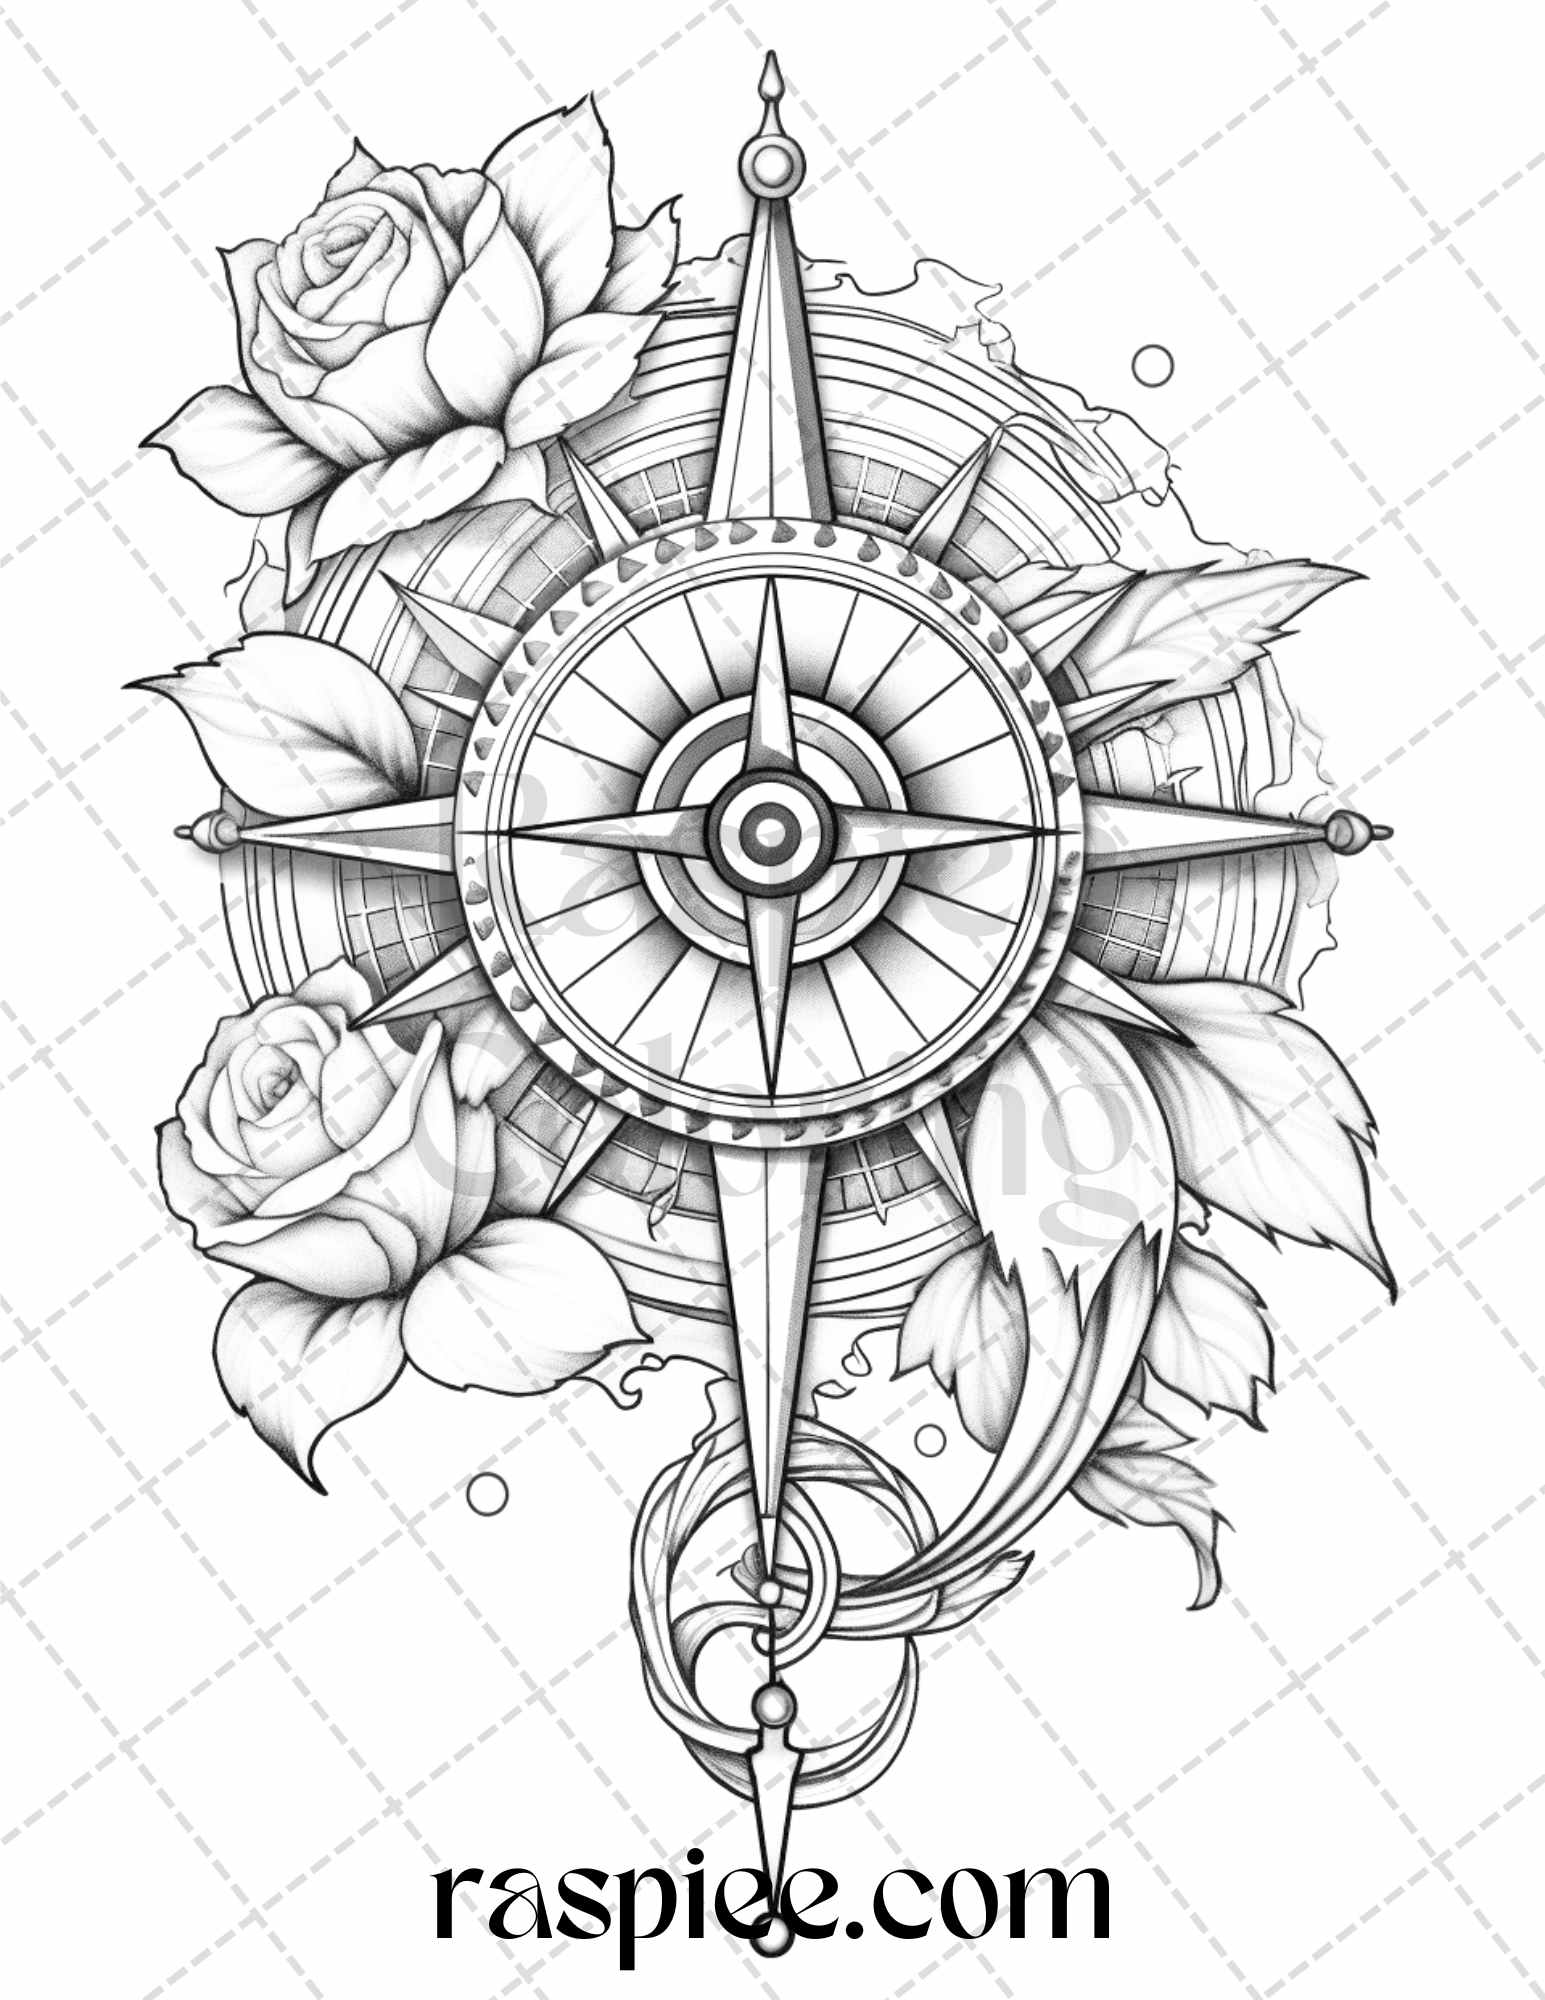 40 Beautiful Tattoos Grayscale Coloring Pages Printable for Adults, PDF File Instant Download - raspiee